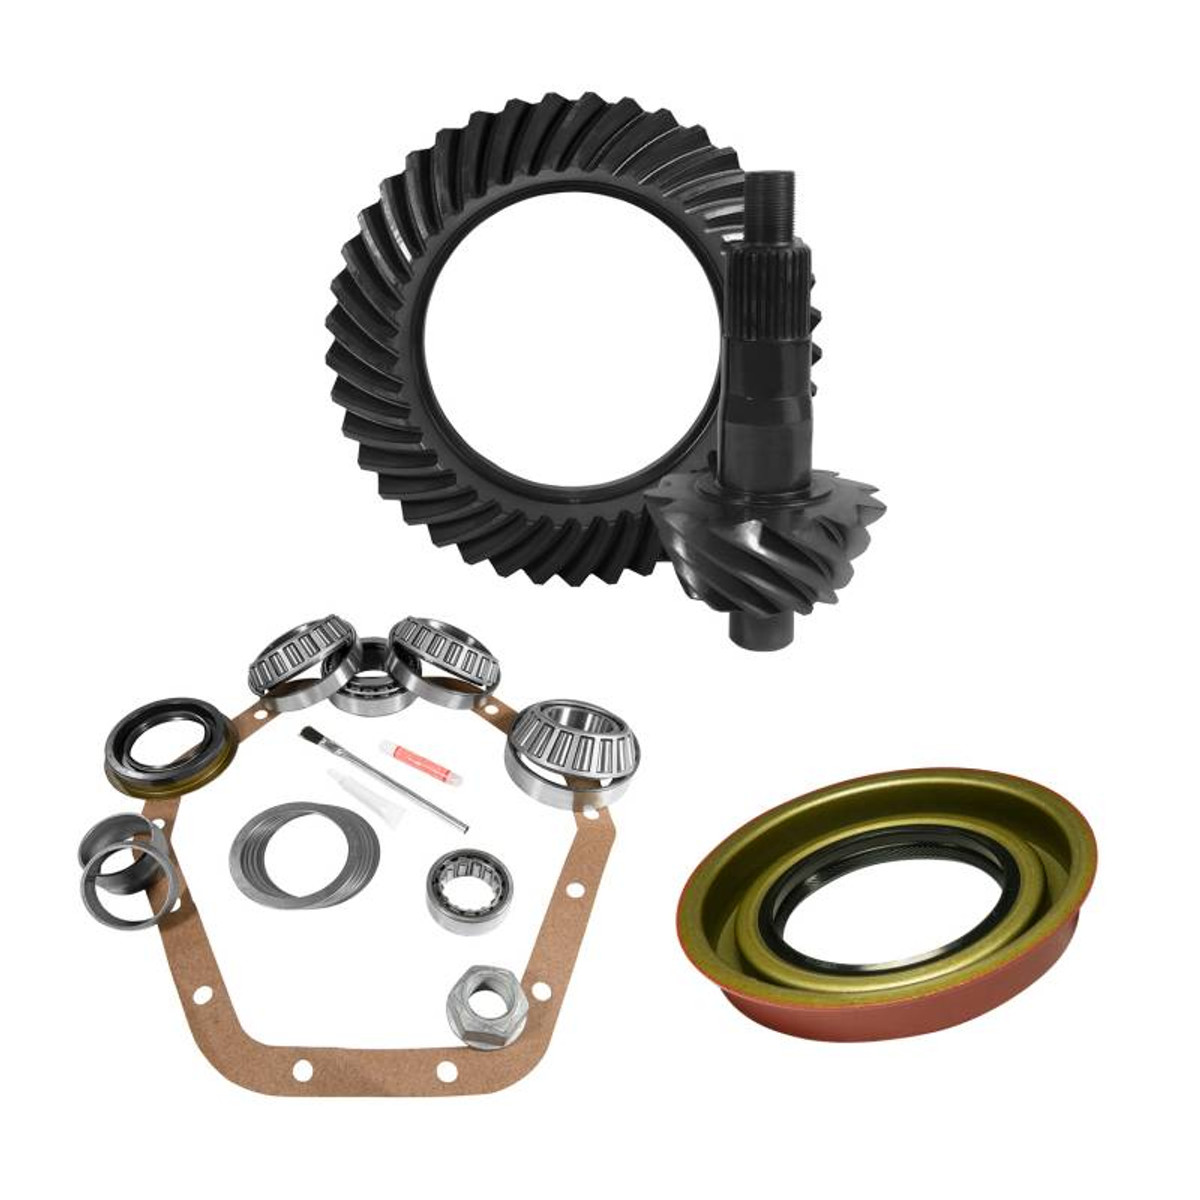 10.5 inch GM 14 Bolt 5.13 Thick Rear Ring and Pinion Install Kit YGK2123